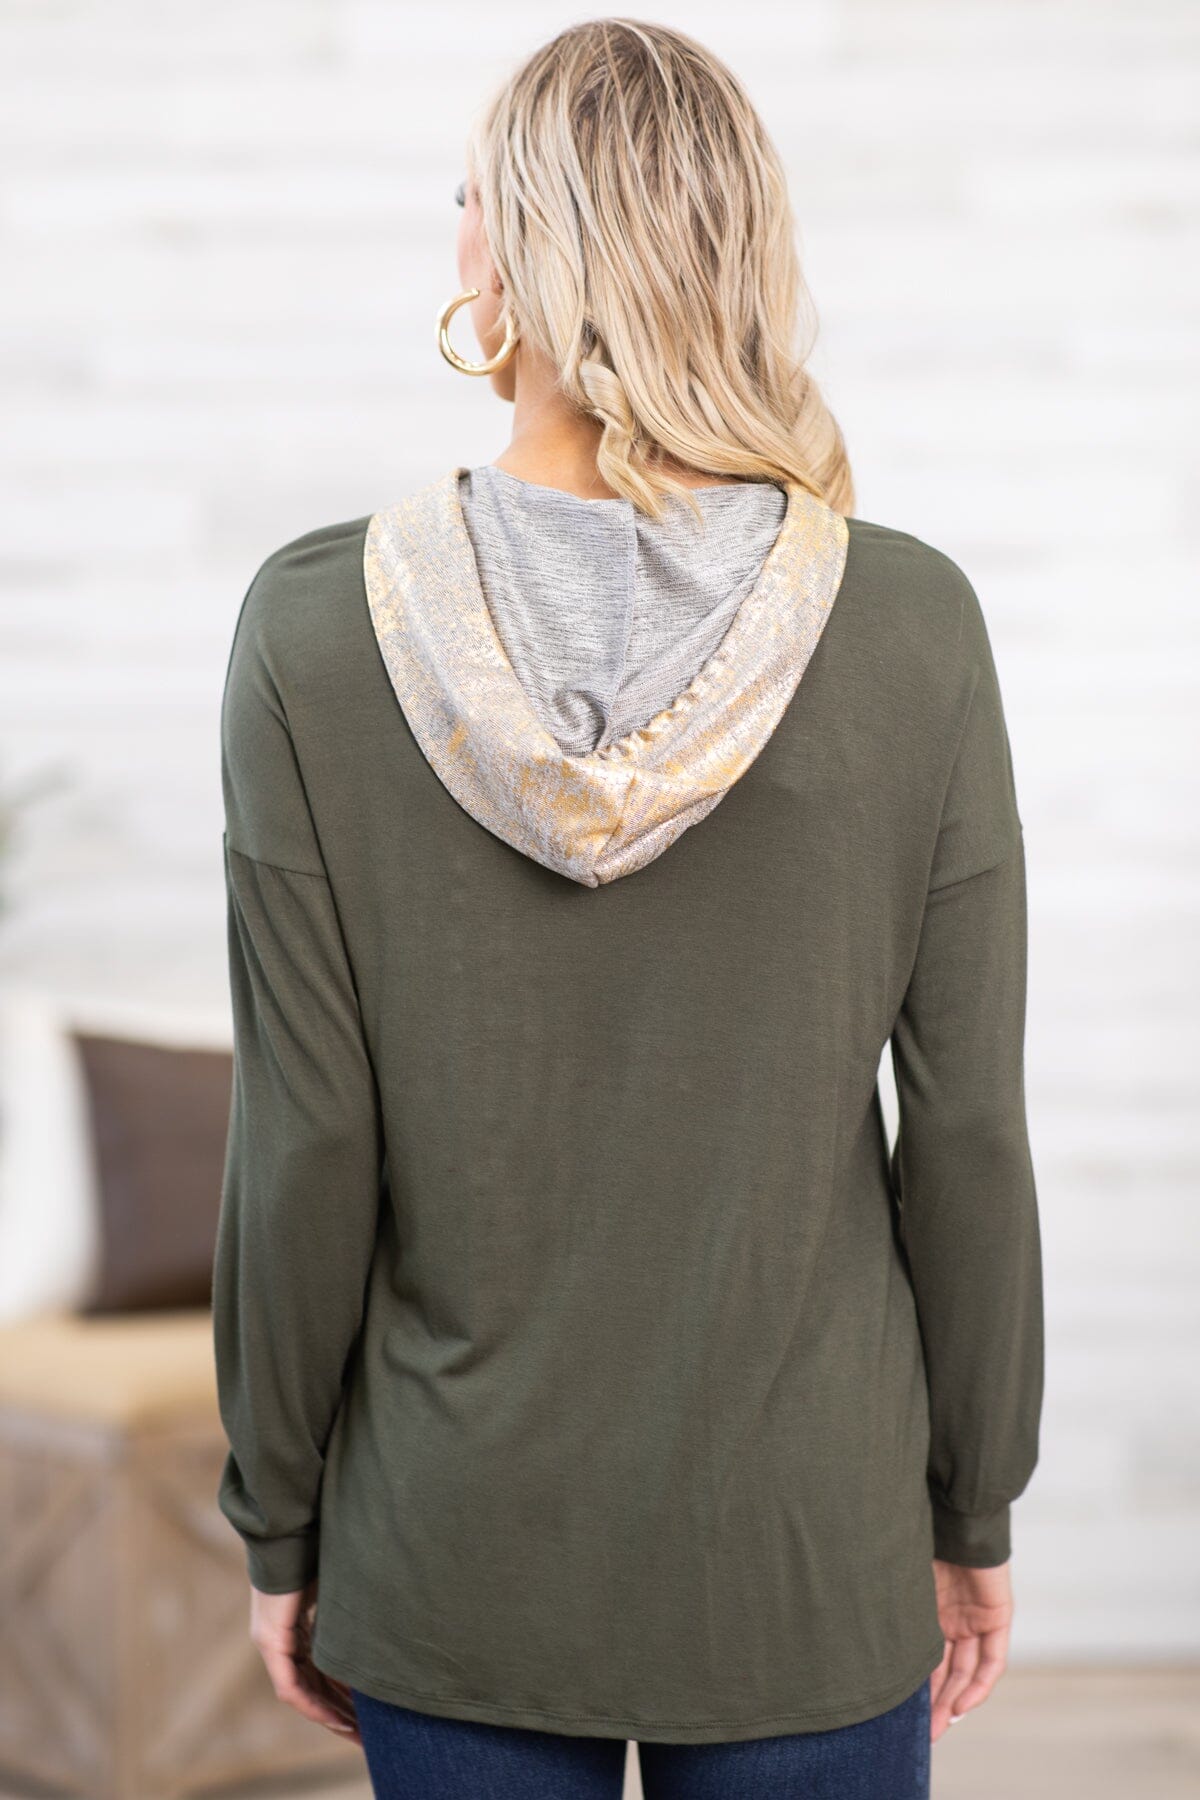 Olive and Gold Metallic Colorblock Hooded Top - Filly Flair